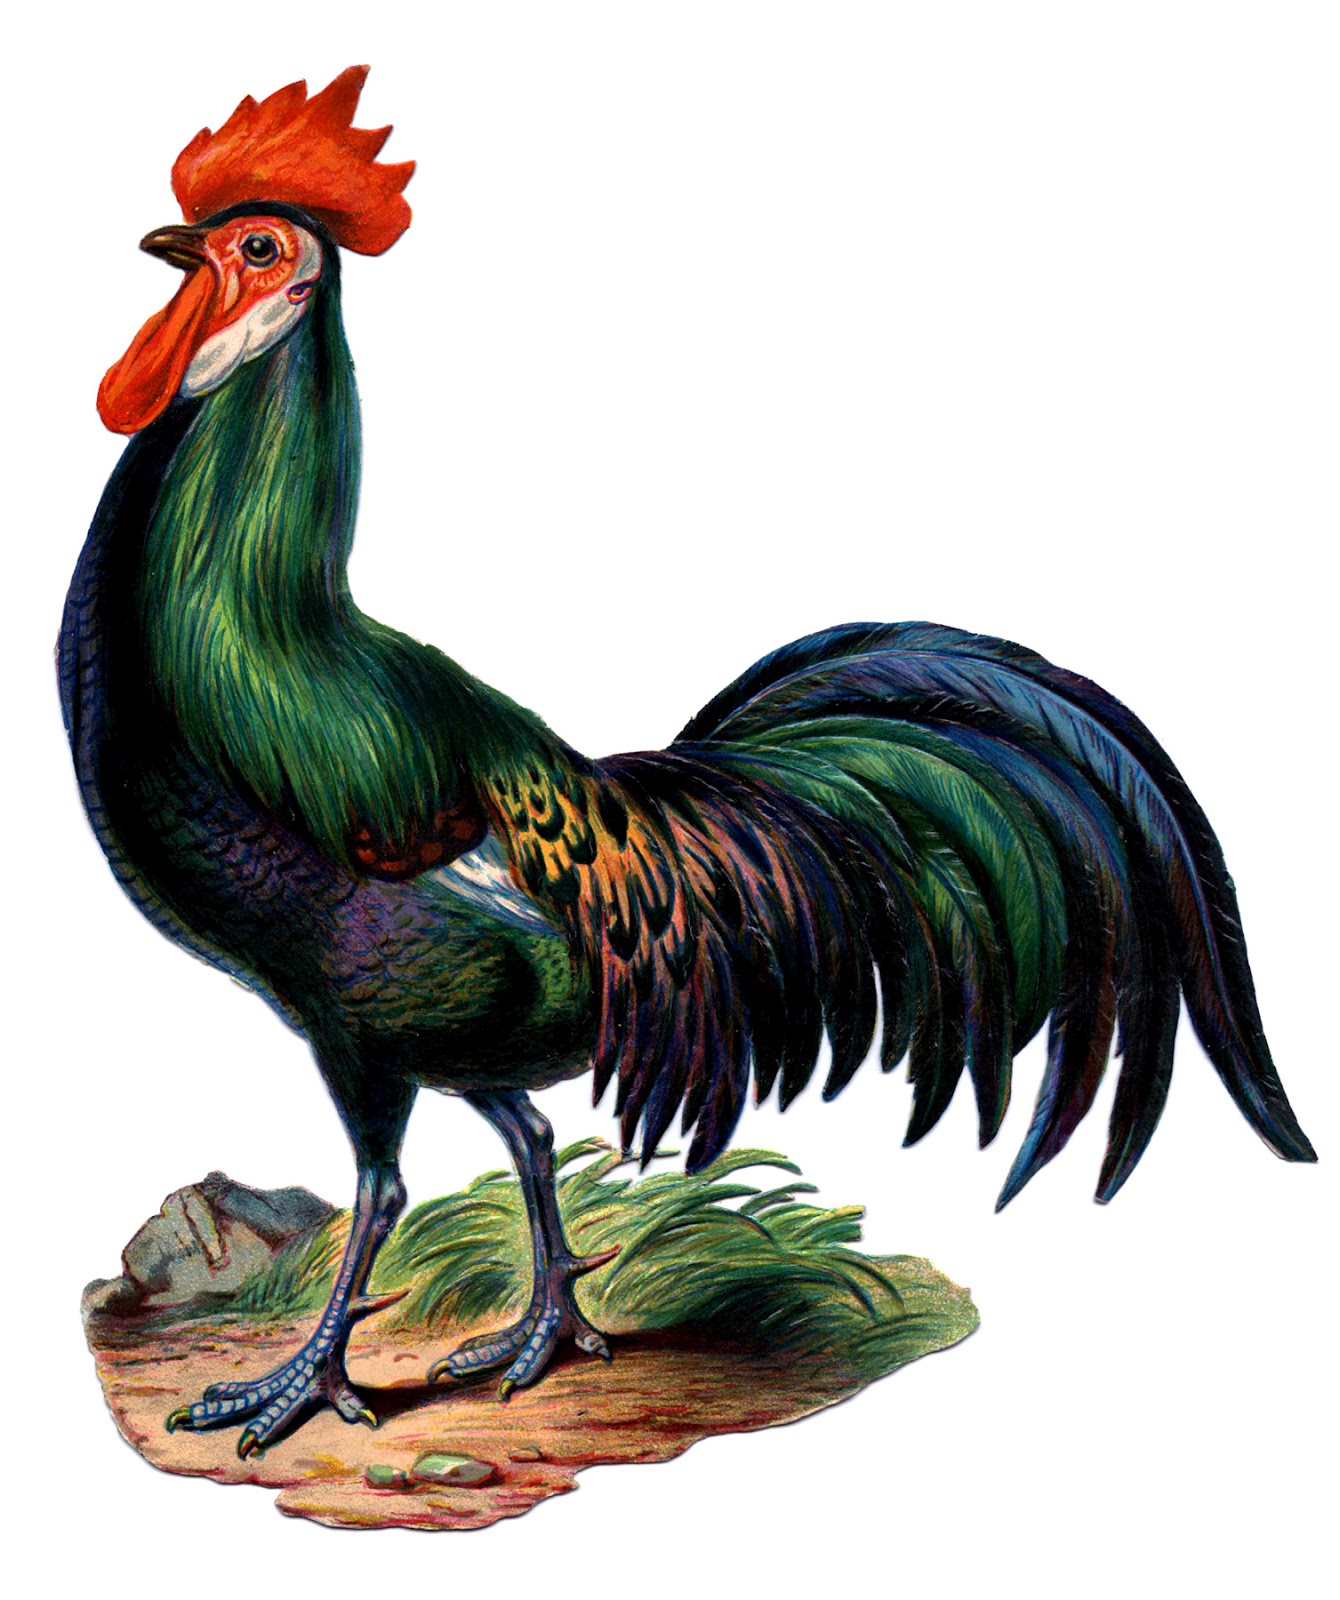 http://thegraphicsfairy.com/wp-content/uploads/blogger/-a0ODvQVcnQ0/T4L8Fe5o_AI/AAAAAAAARWI/_3Igr7cepJU/s1600/rooster-Image-Graphics-Fairy.jpg